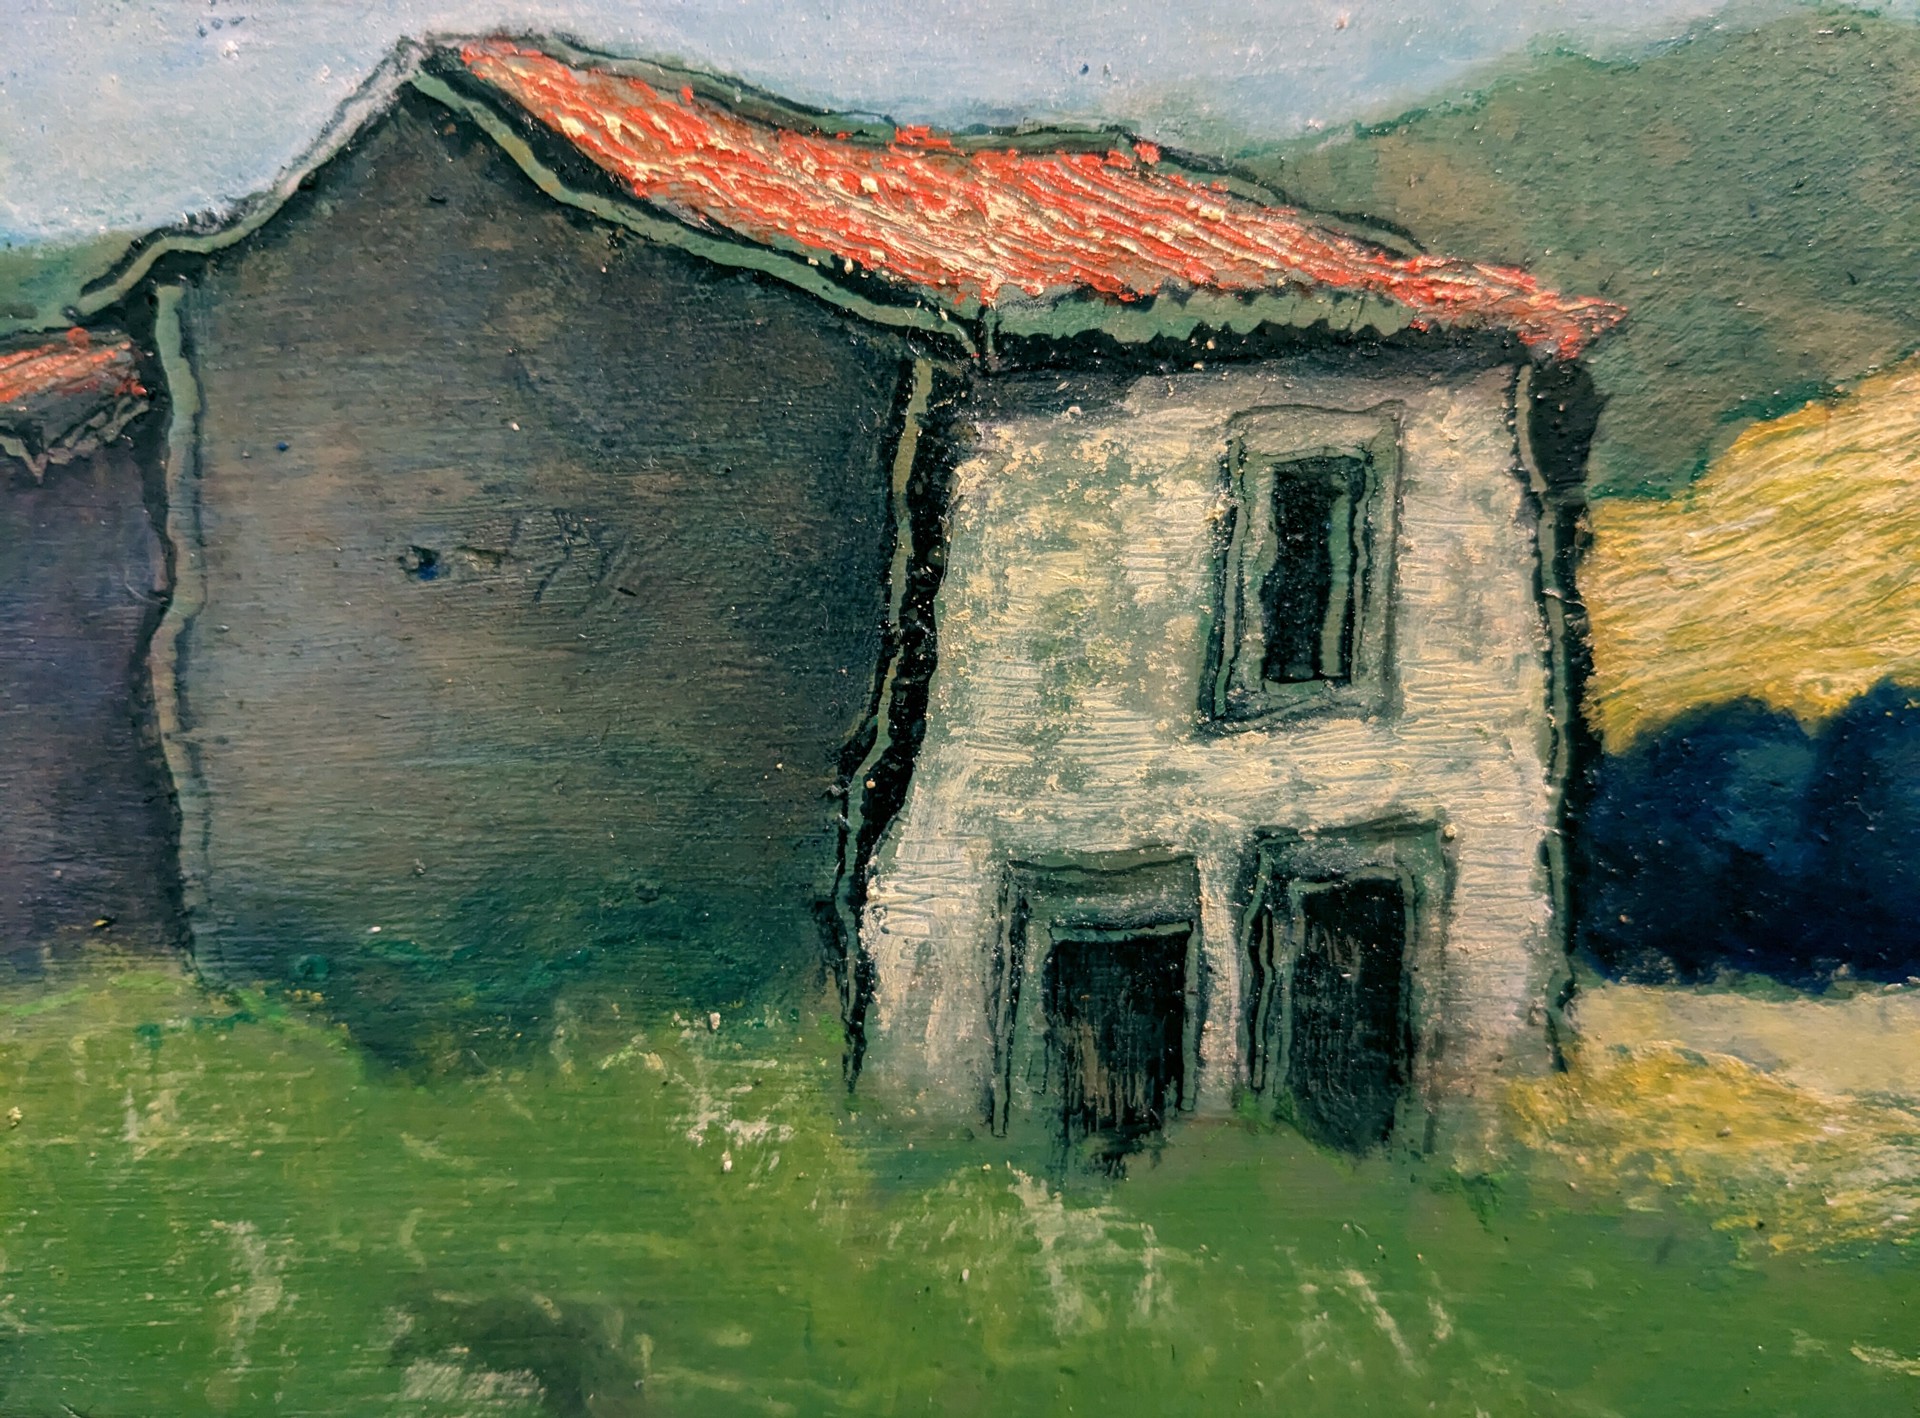 Farmhouse Beyond the Village (Cavillargues) by Andy Newman